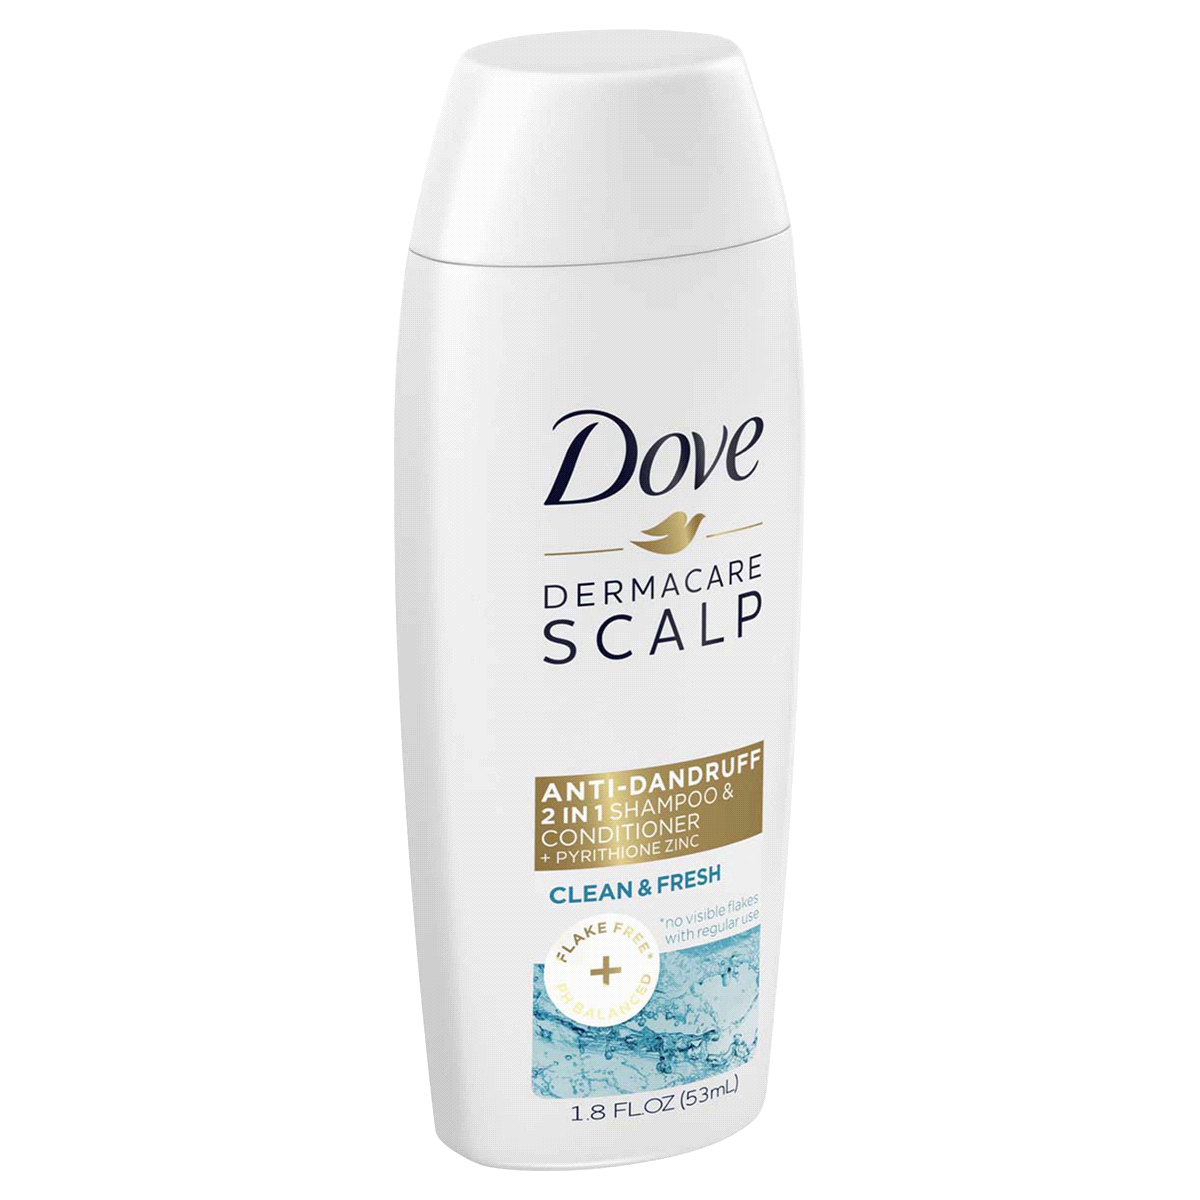 slide 5 of 5, Dove DermaCare Scalp Pure Daily Care 2 in 1 Shampoo and Conditioner, 1.8 oz